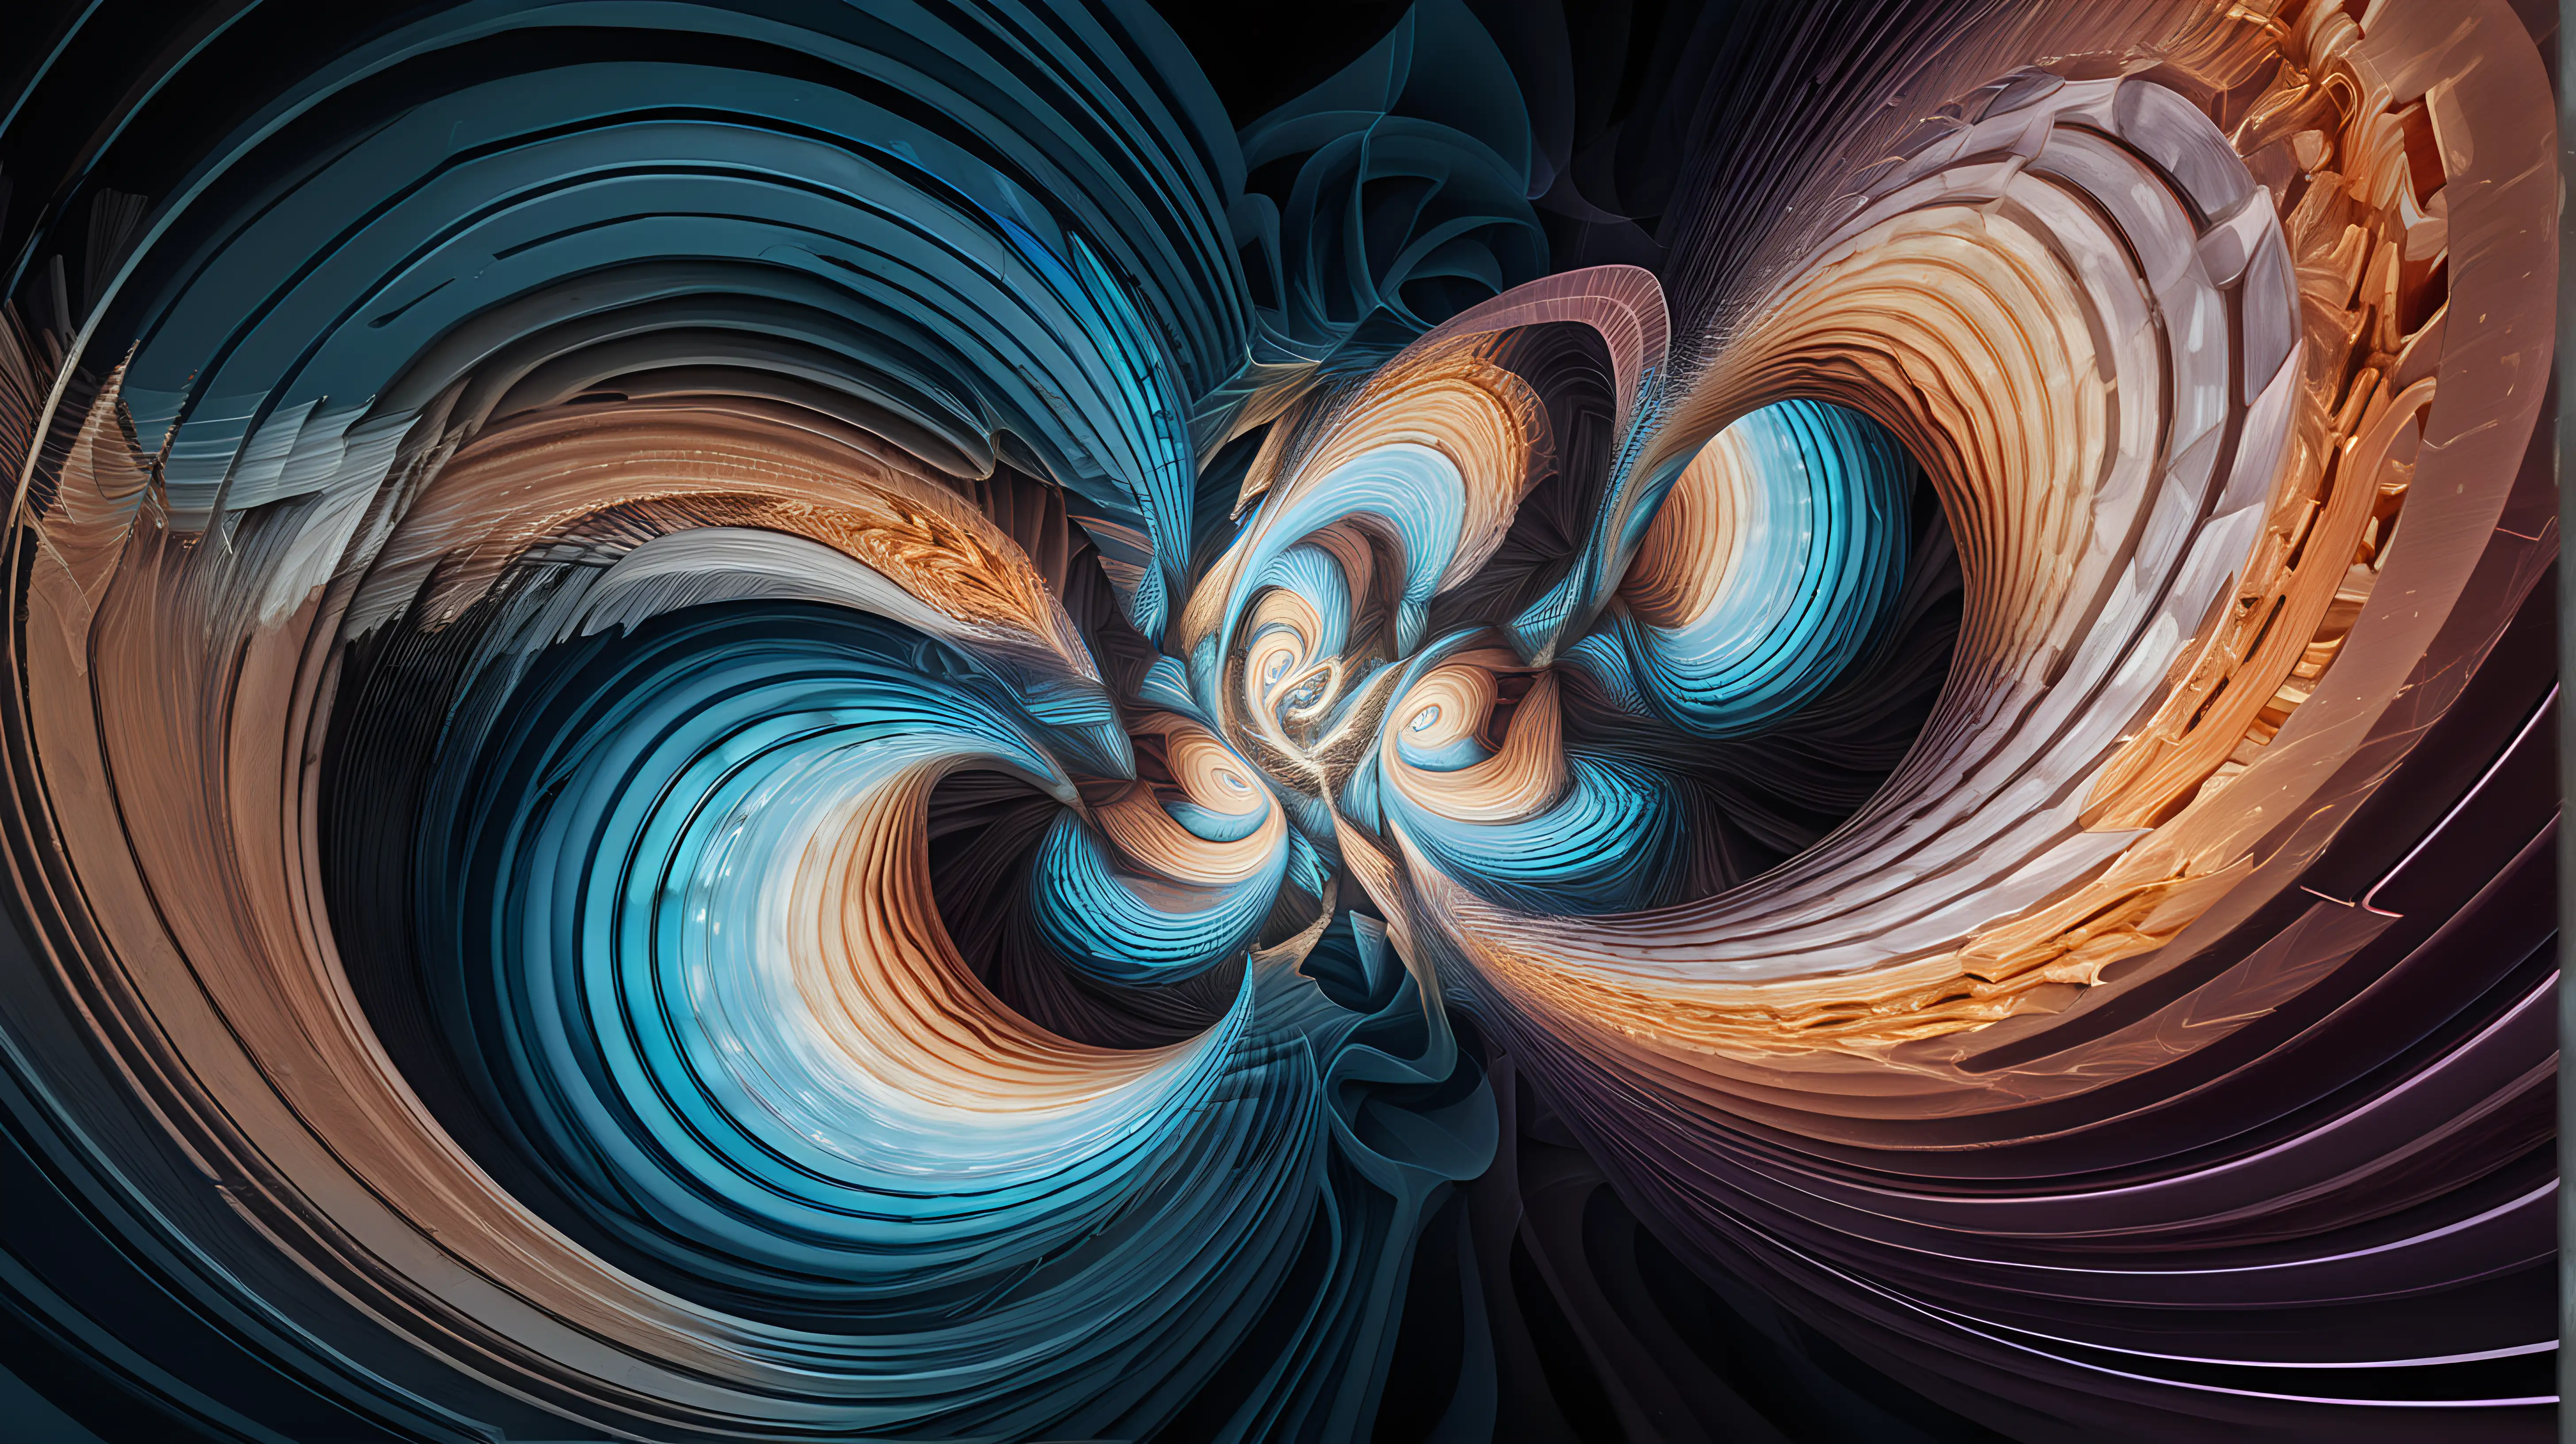 Abstract Time Warps and Distortion Digital Art Print